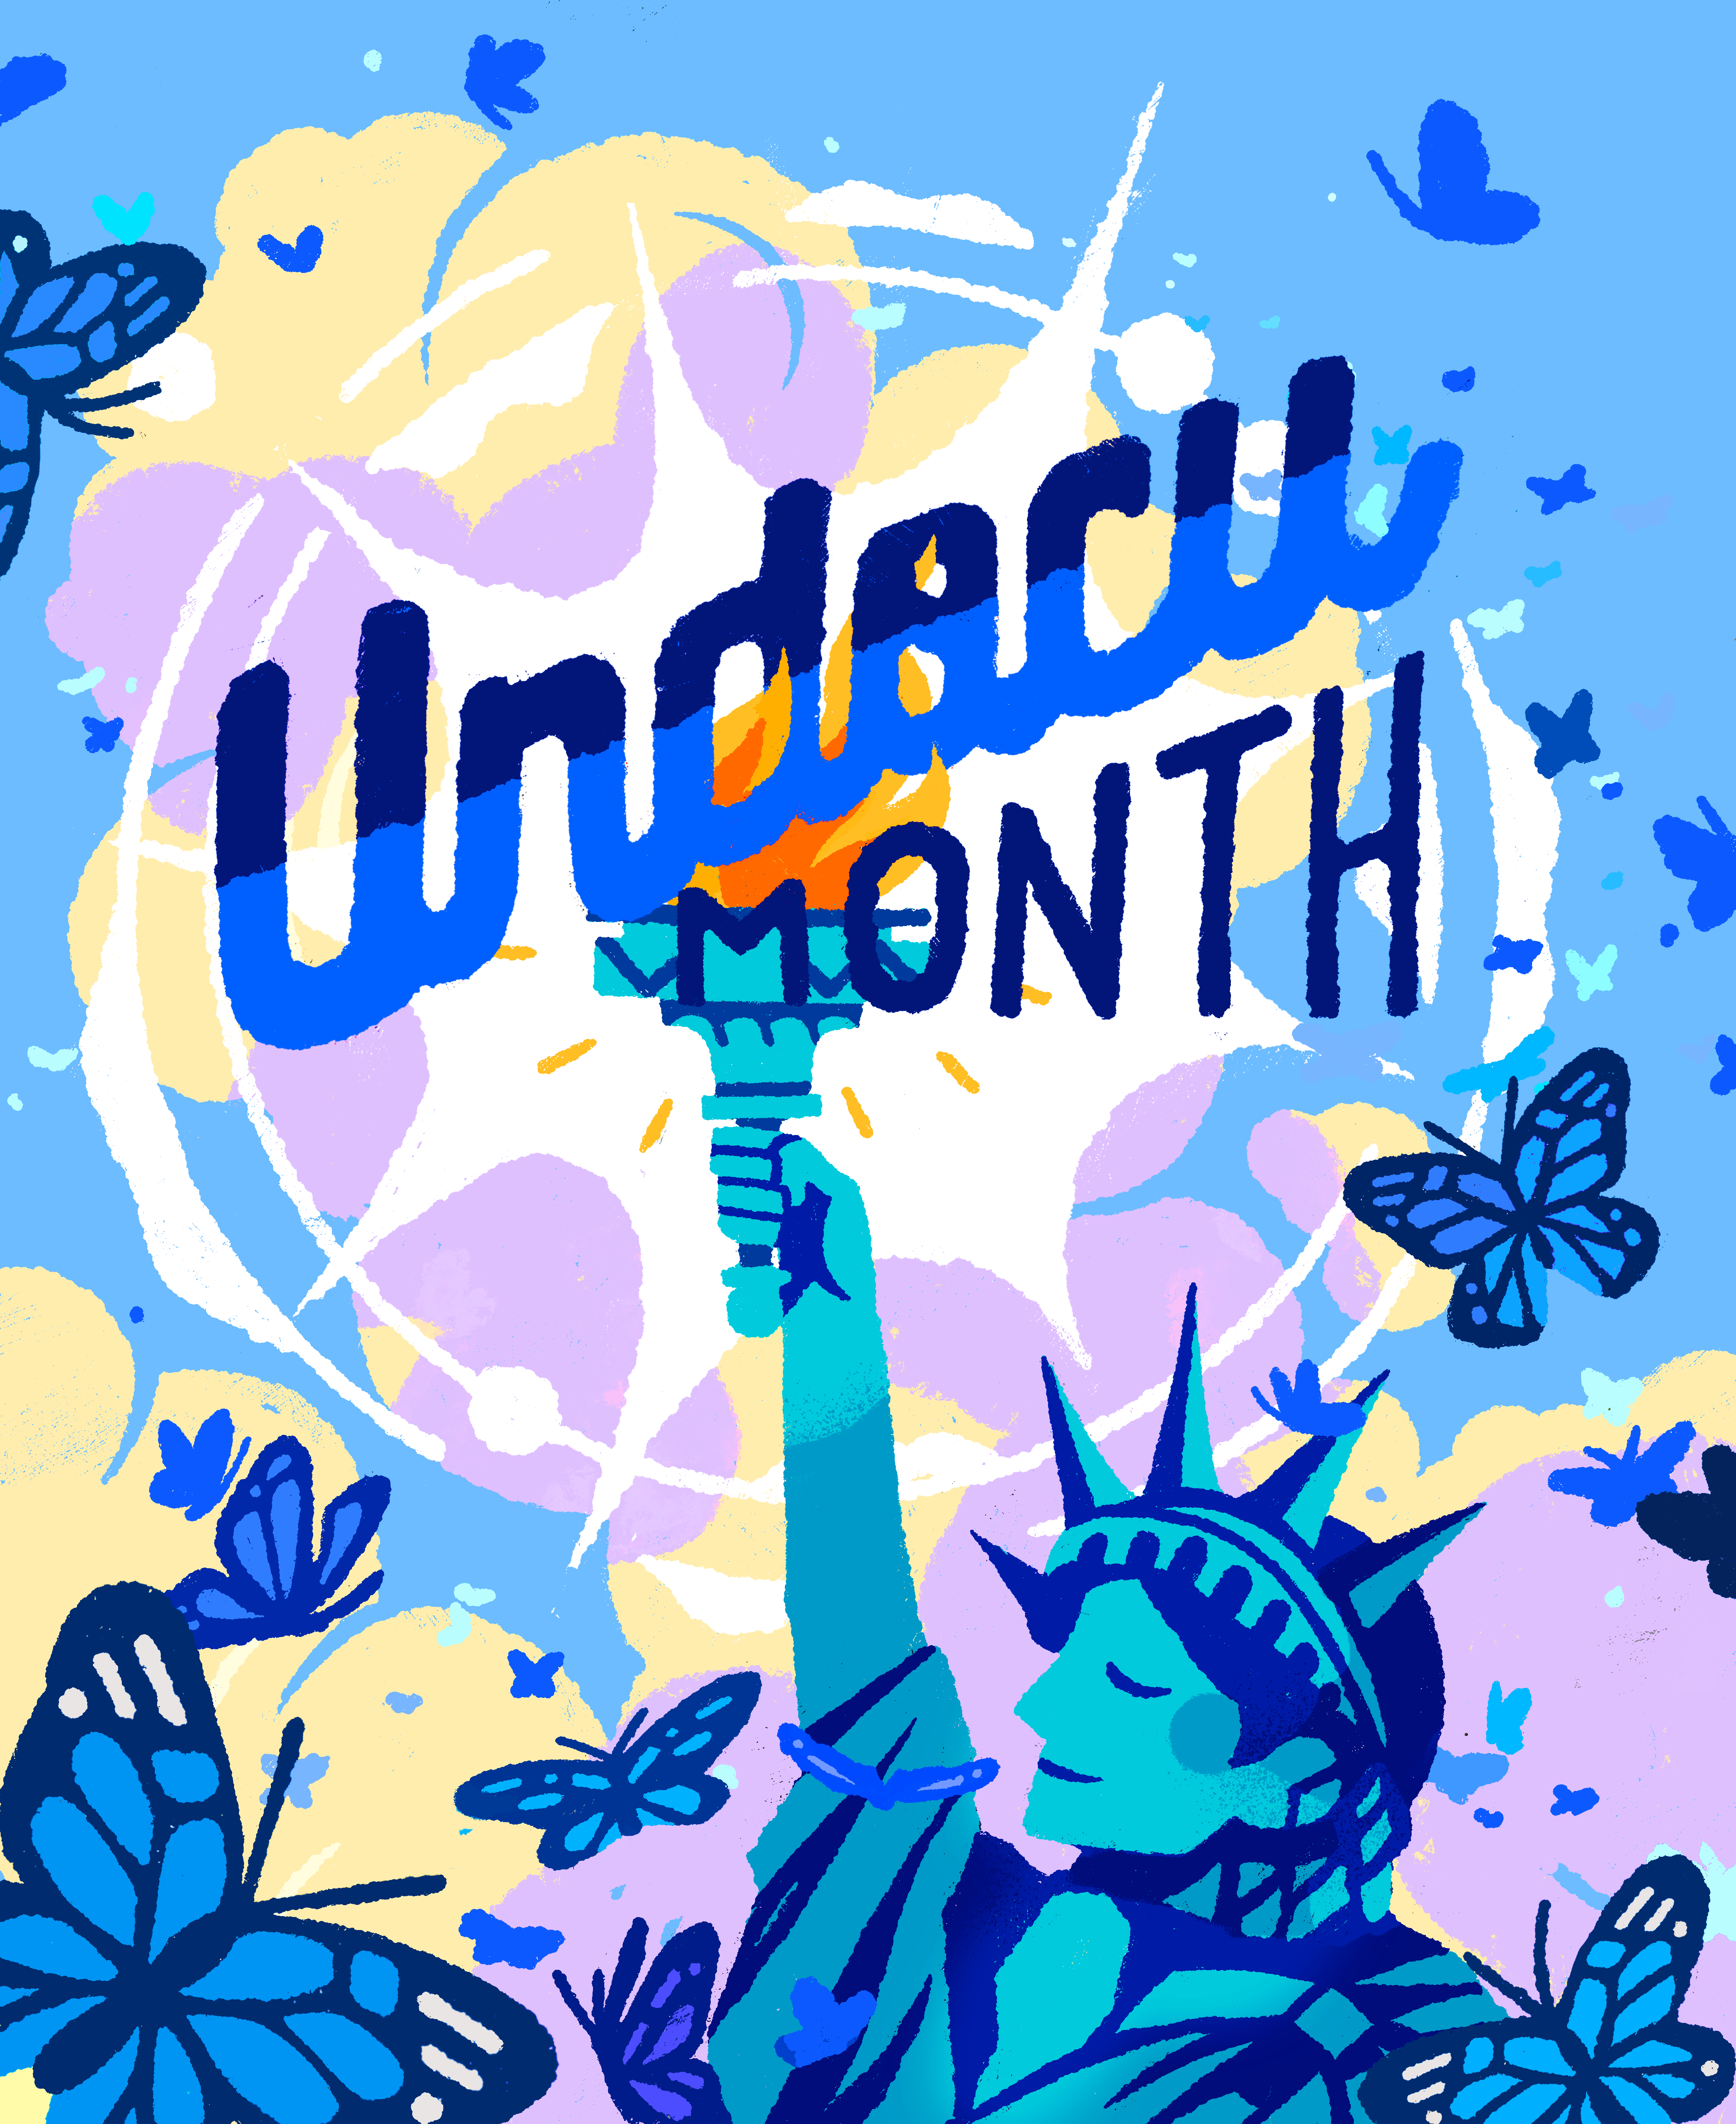 a decorative drawing of the Statue of Liberty surrounded by butterflies, with the text "Undocu Month"